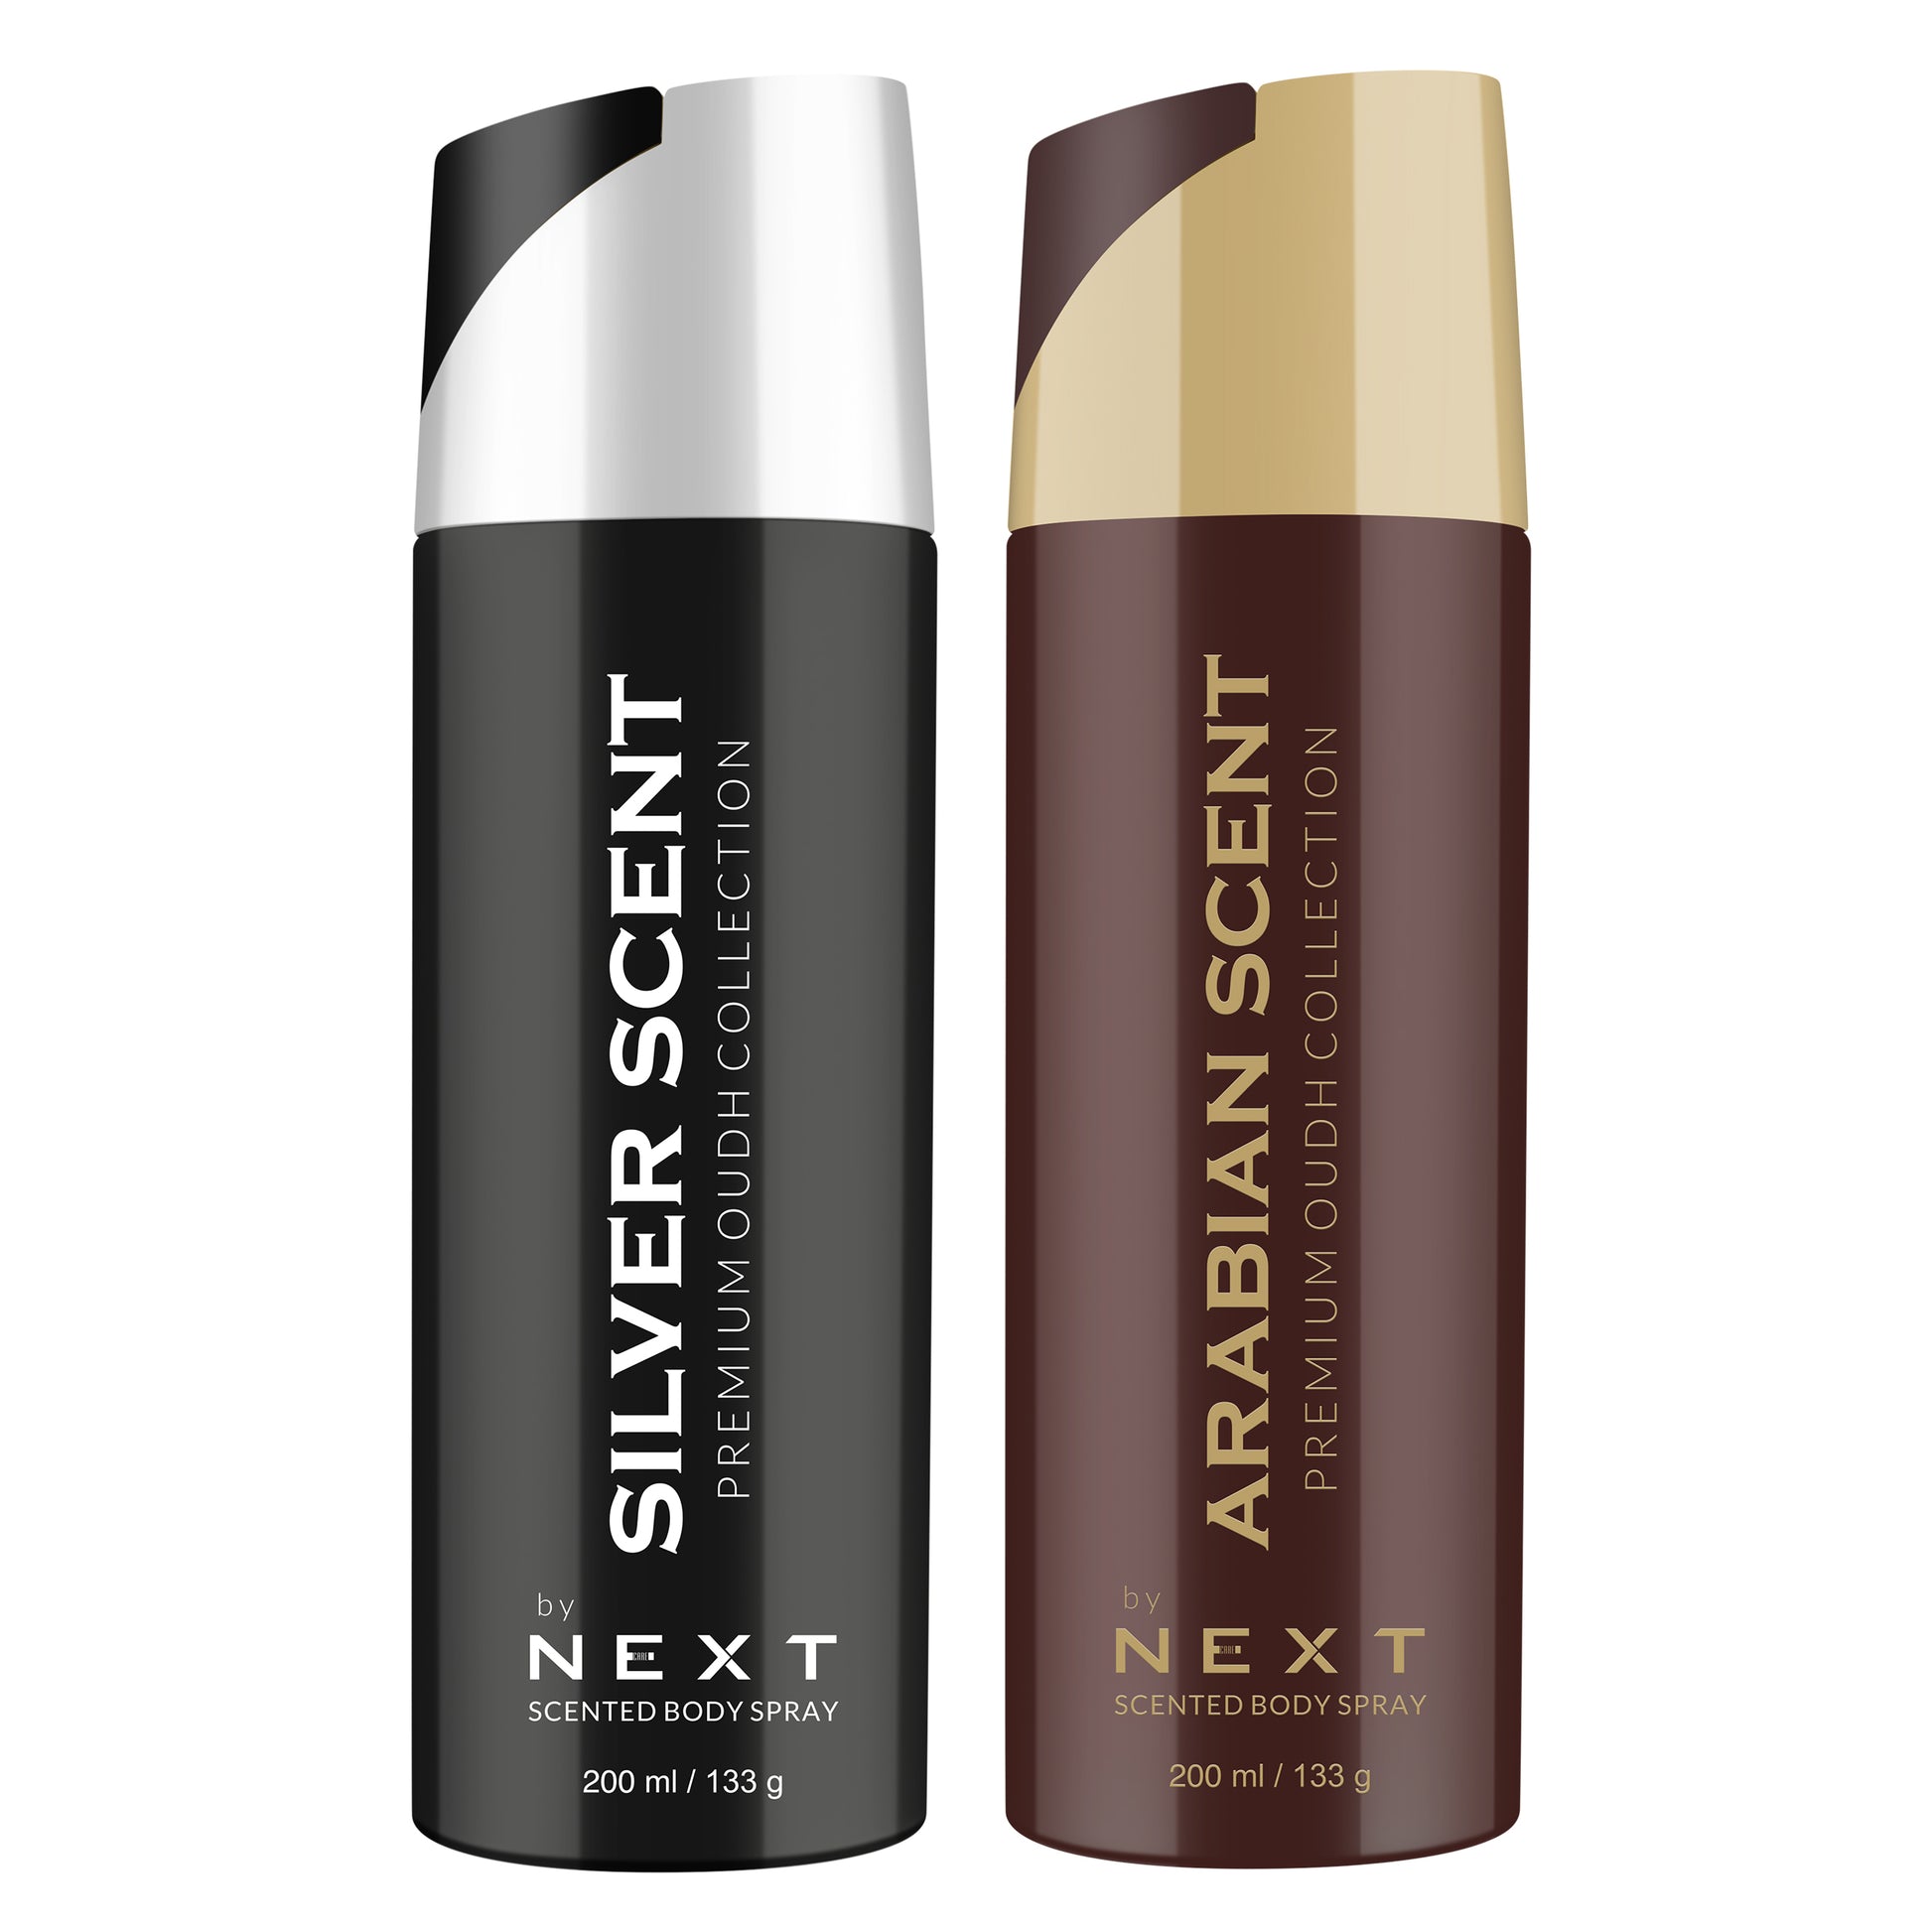 Combo Pack of 2 Next Scented Body Spray -Silver Scent & Arabian Scent - 200 ML Each - For Men and Women